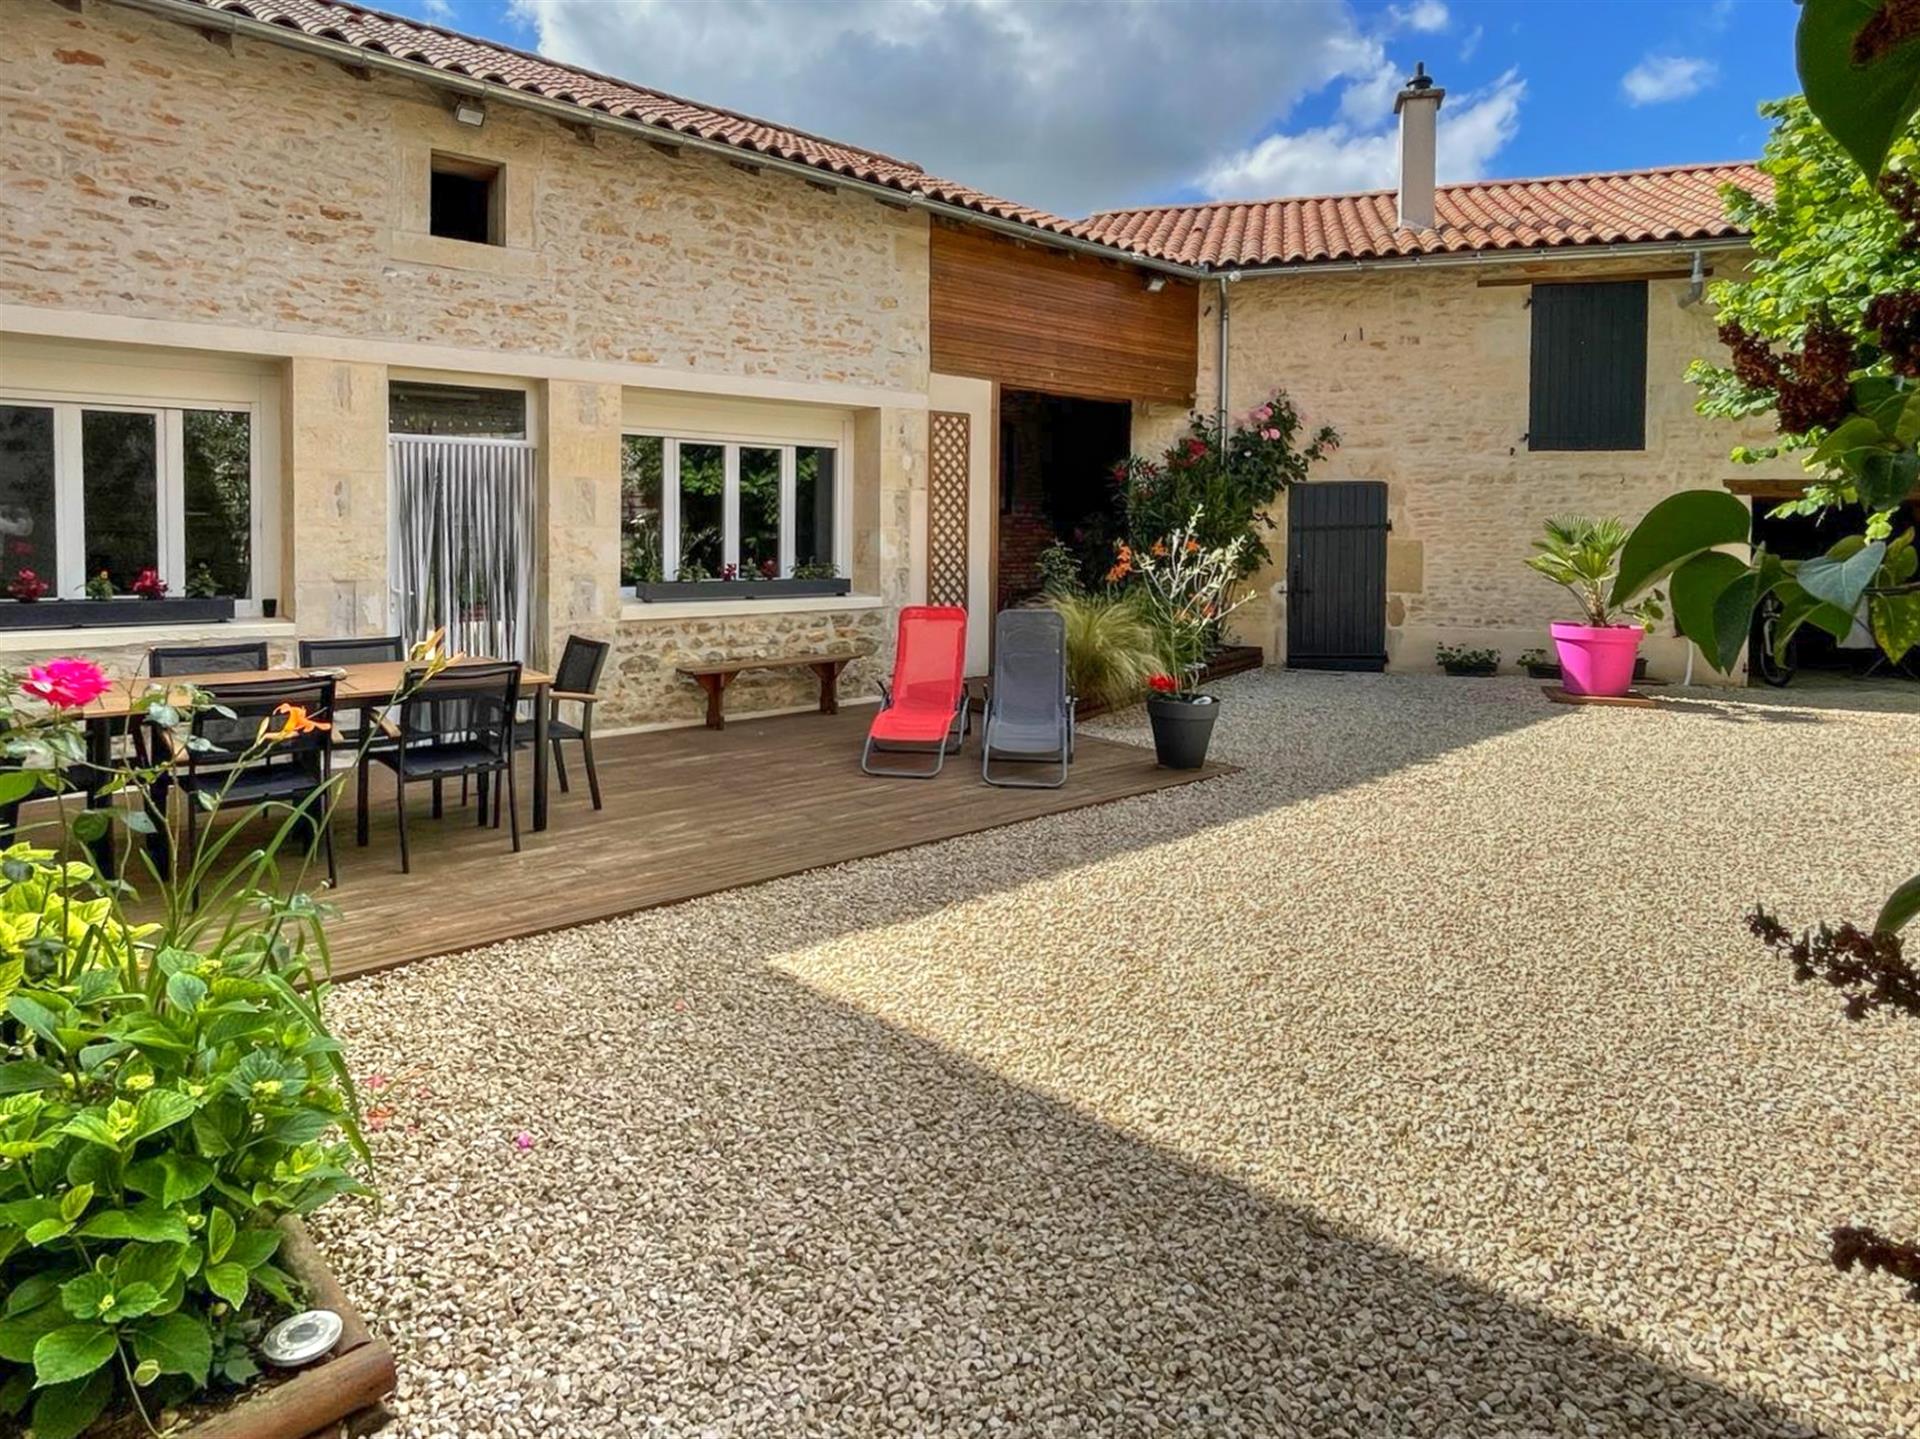 Well maintained village house with courtyard.